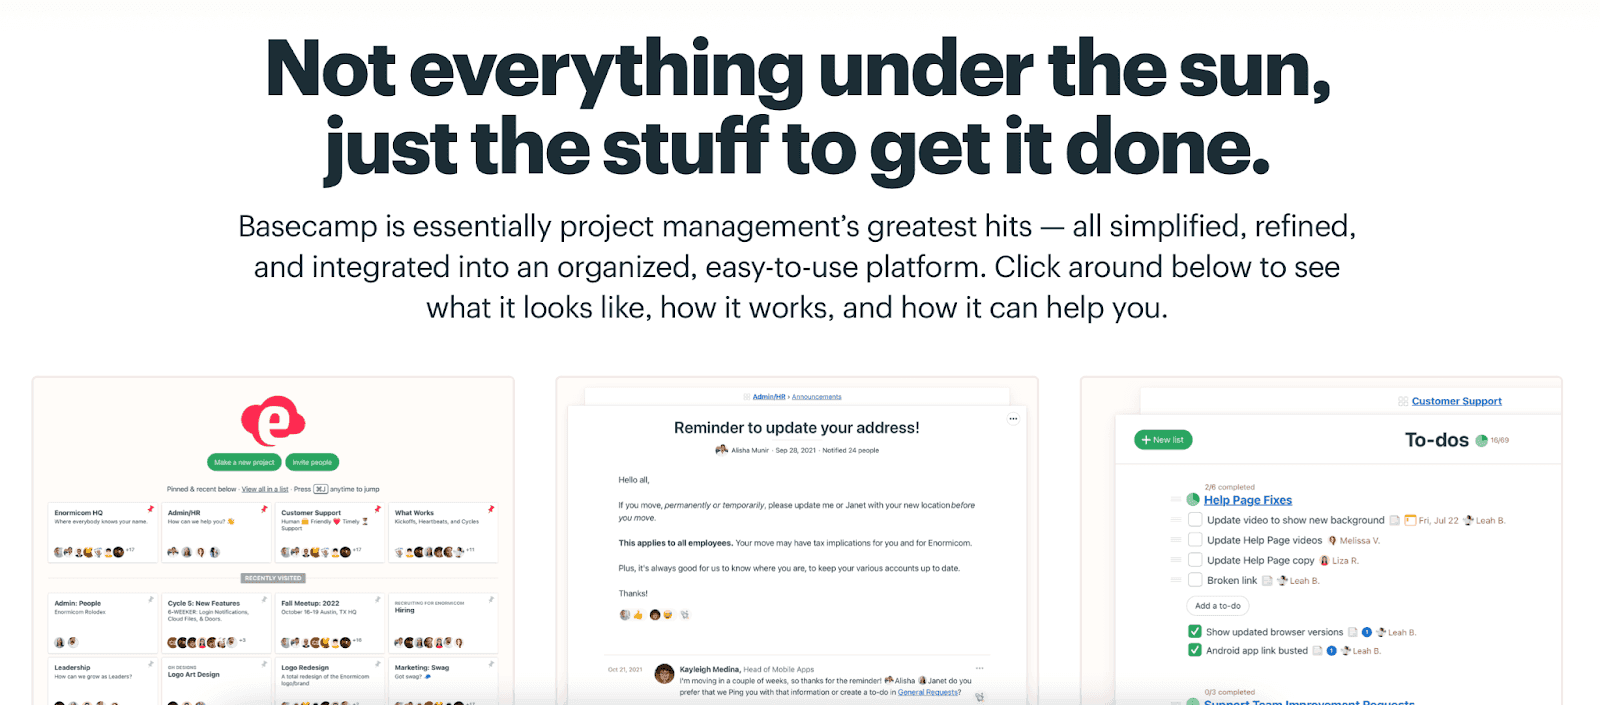 Basecamp features - Not everything under the sun, just the stuff to get it done.